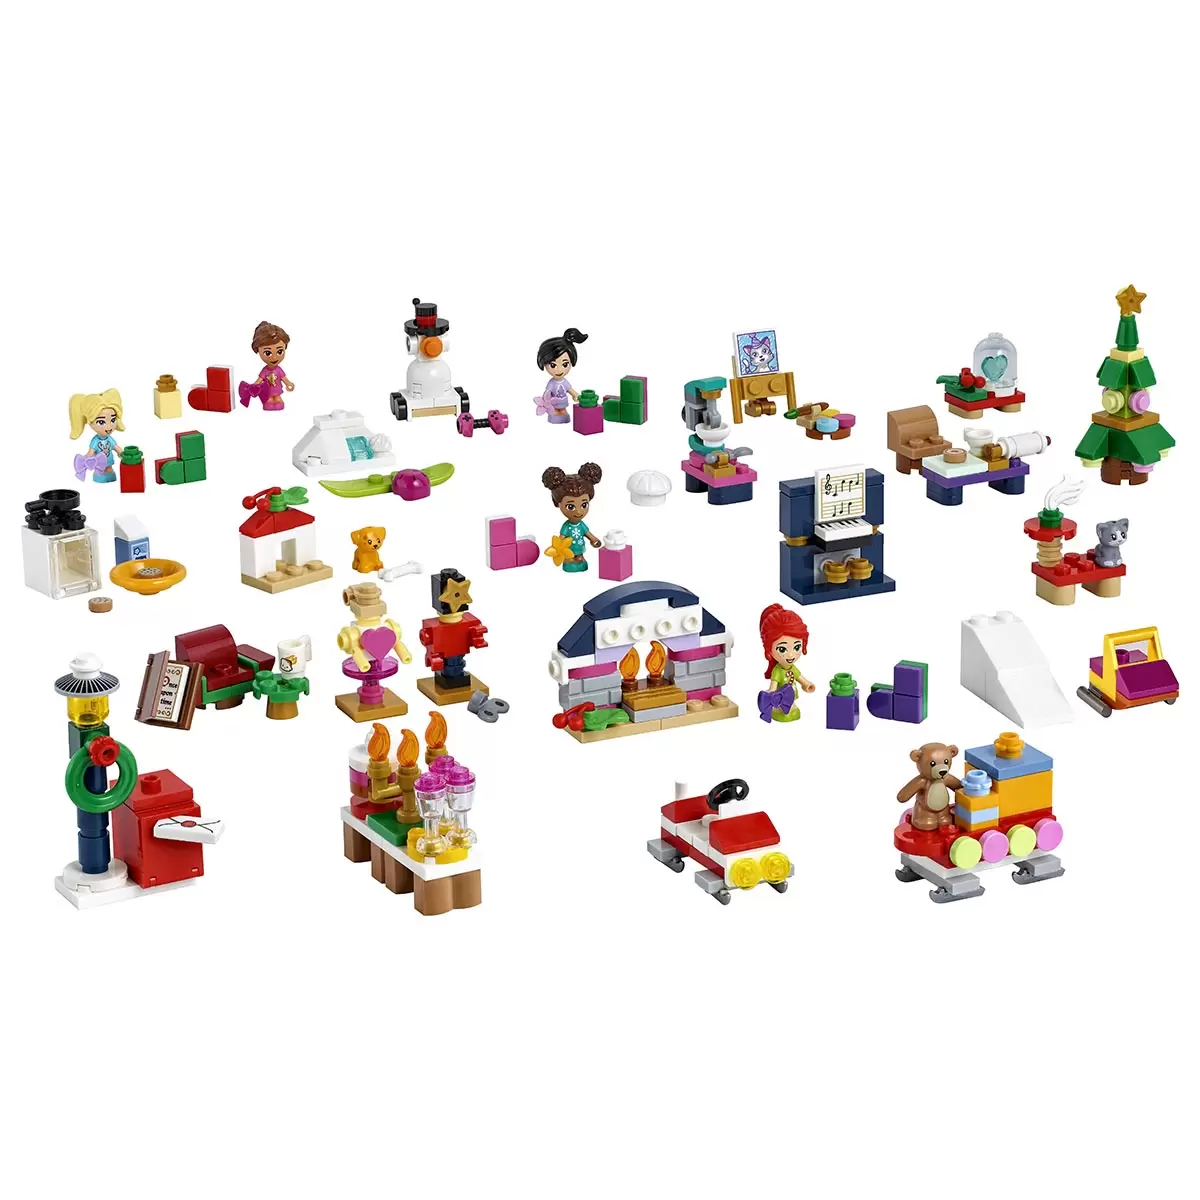 Buy LEGO Friends Advent Calendar Items Image at Costco.co.uk